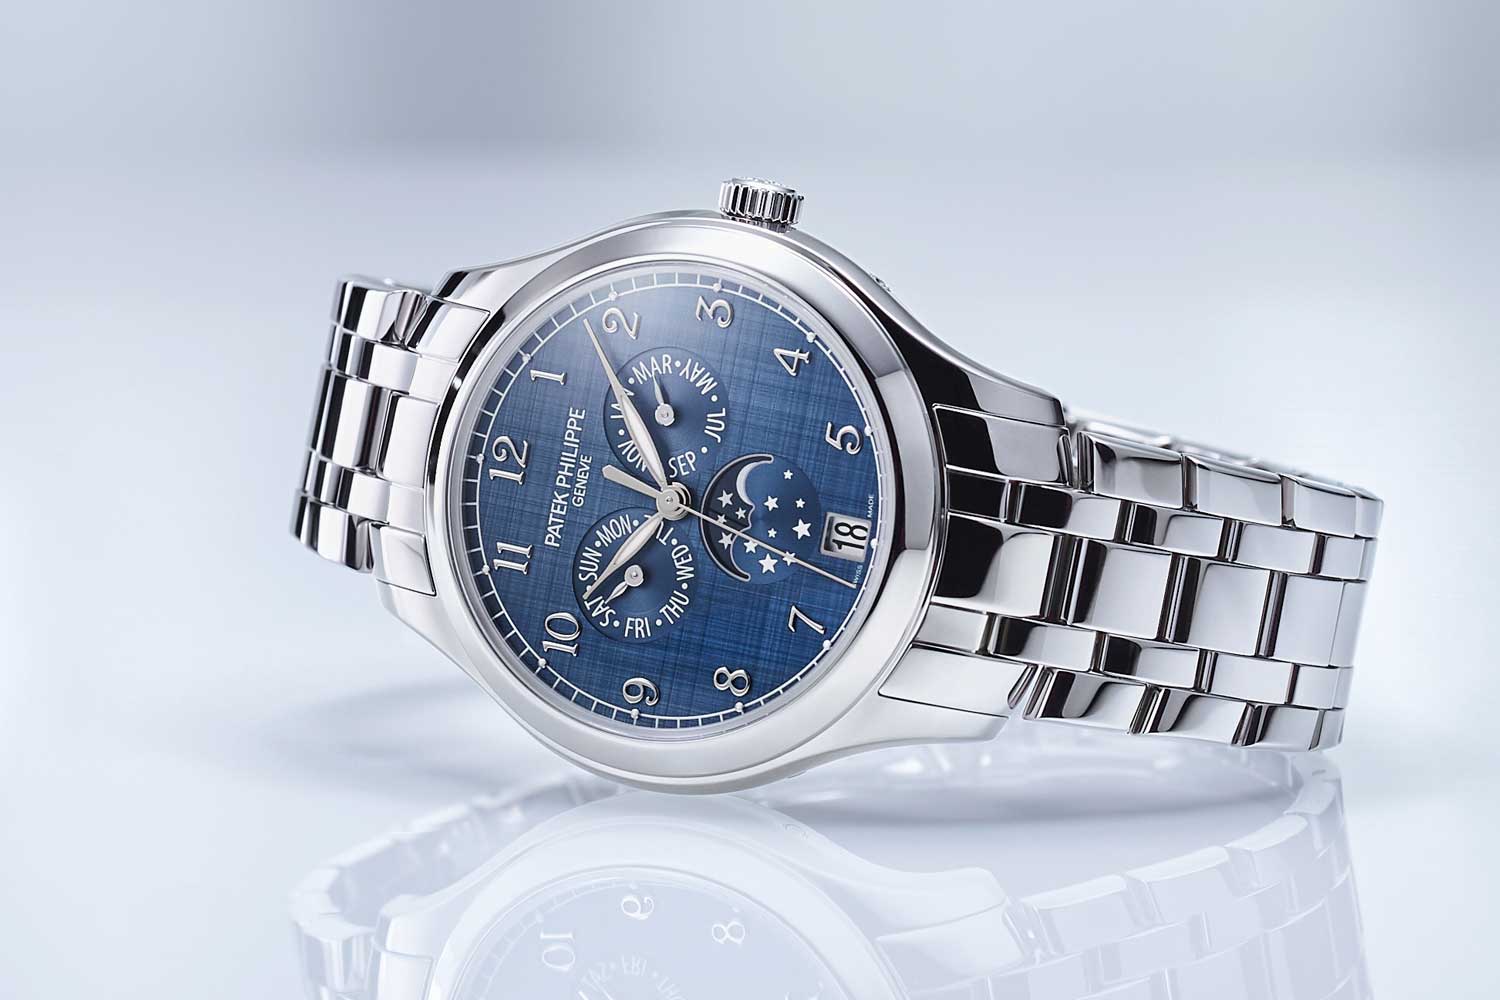 The Patek Philippe Ref. 4947/1A Annual Calendar, Moon Phases in a 38mm stainless steel case and bracelet